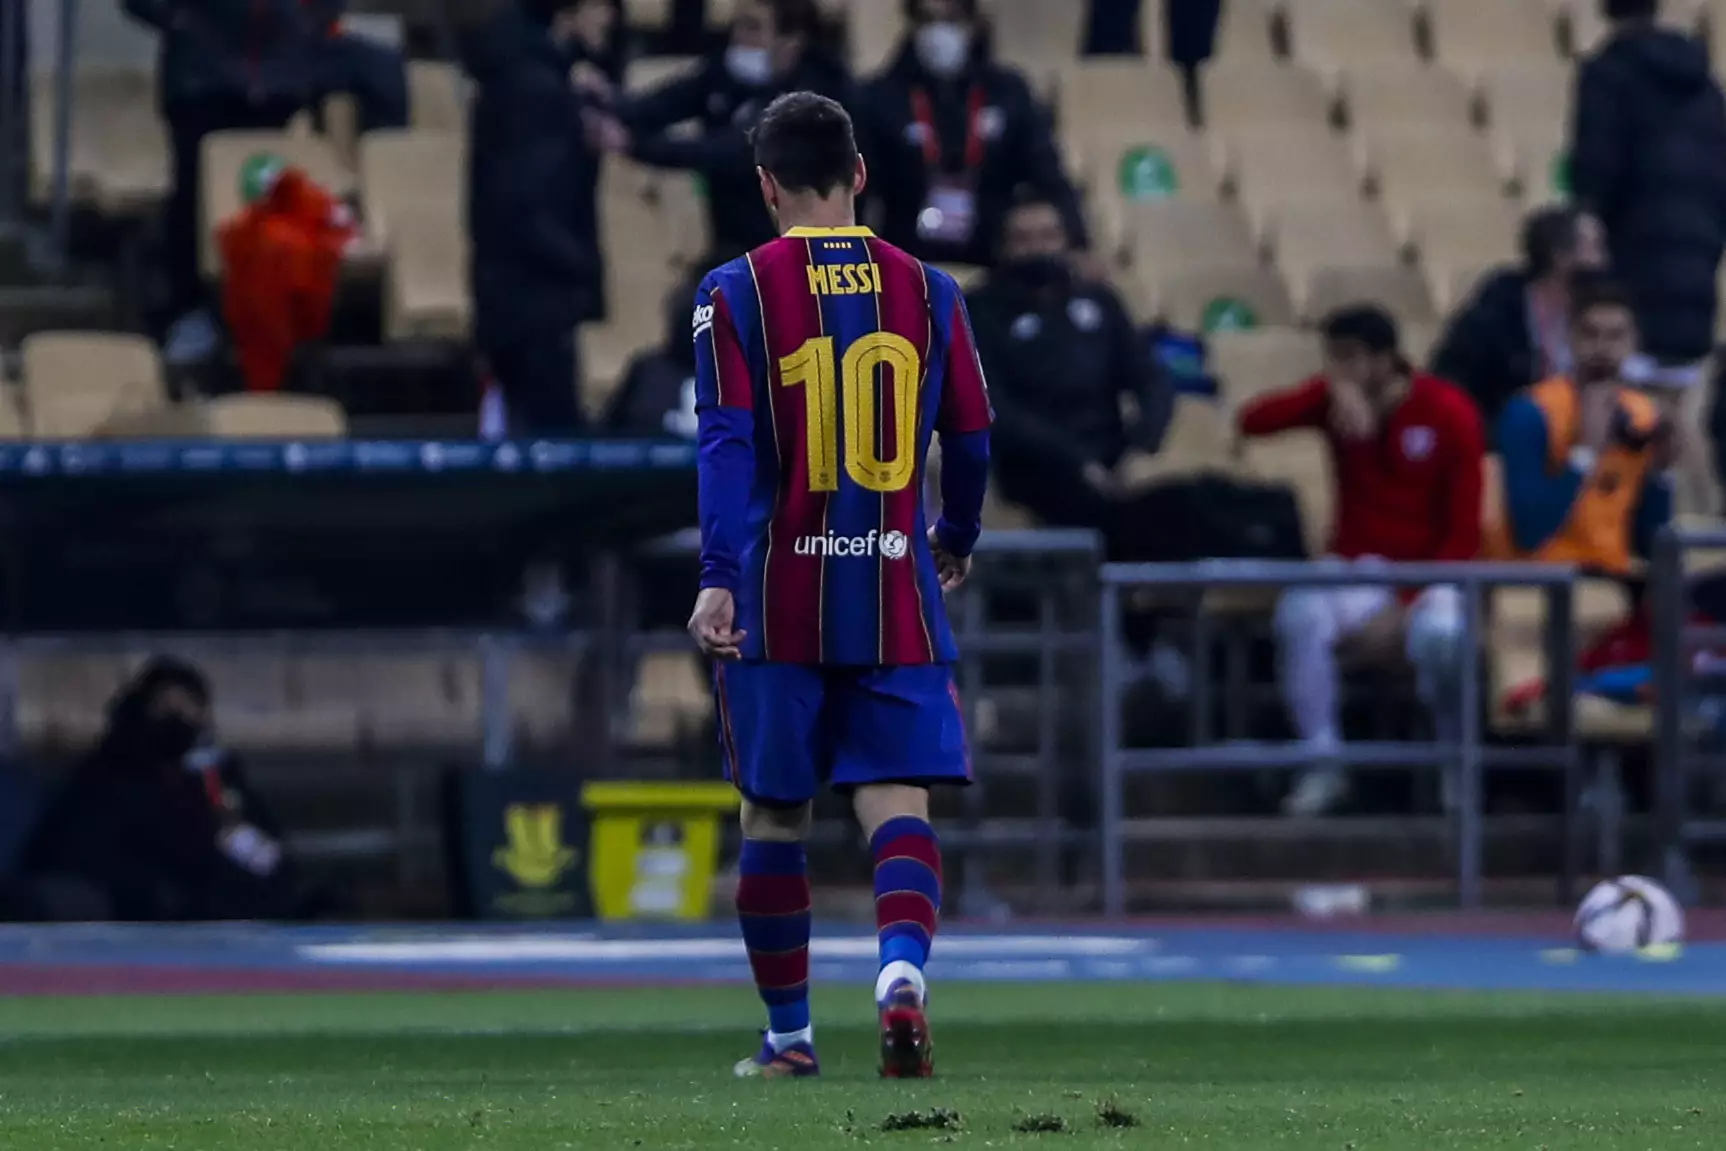 Messi walks off after getting sent off. Image: PA Images